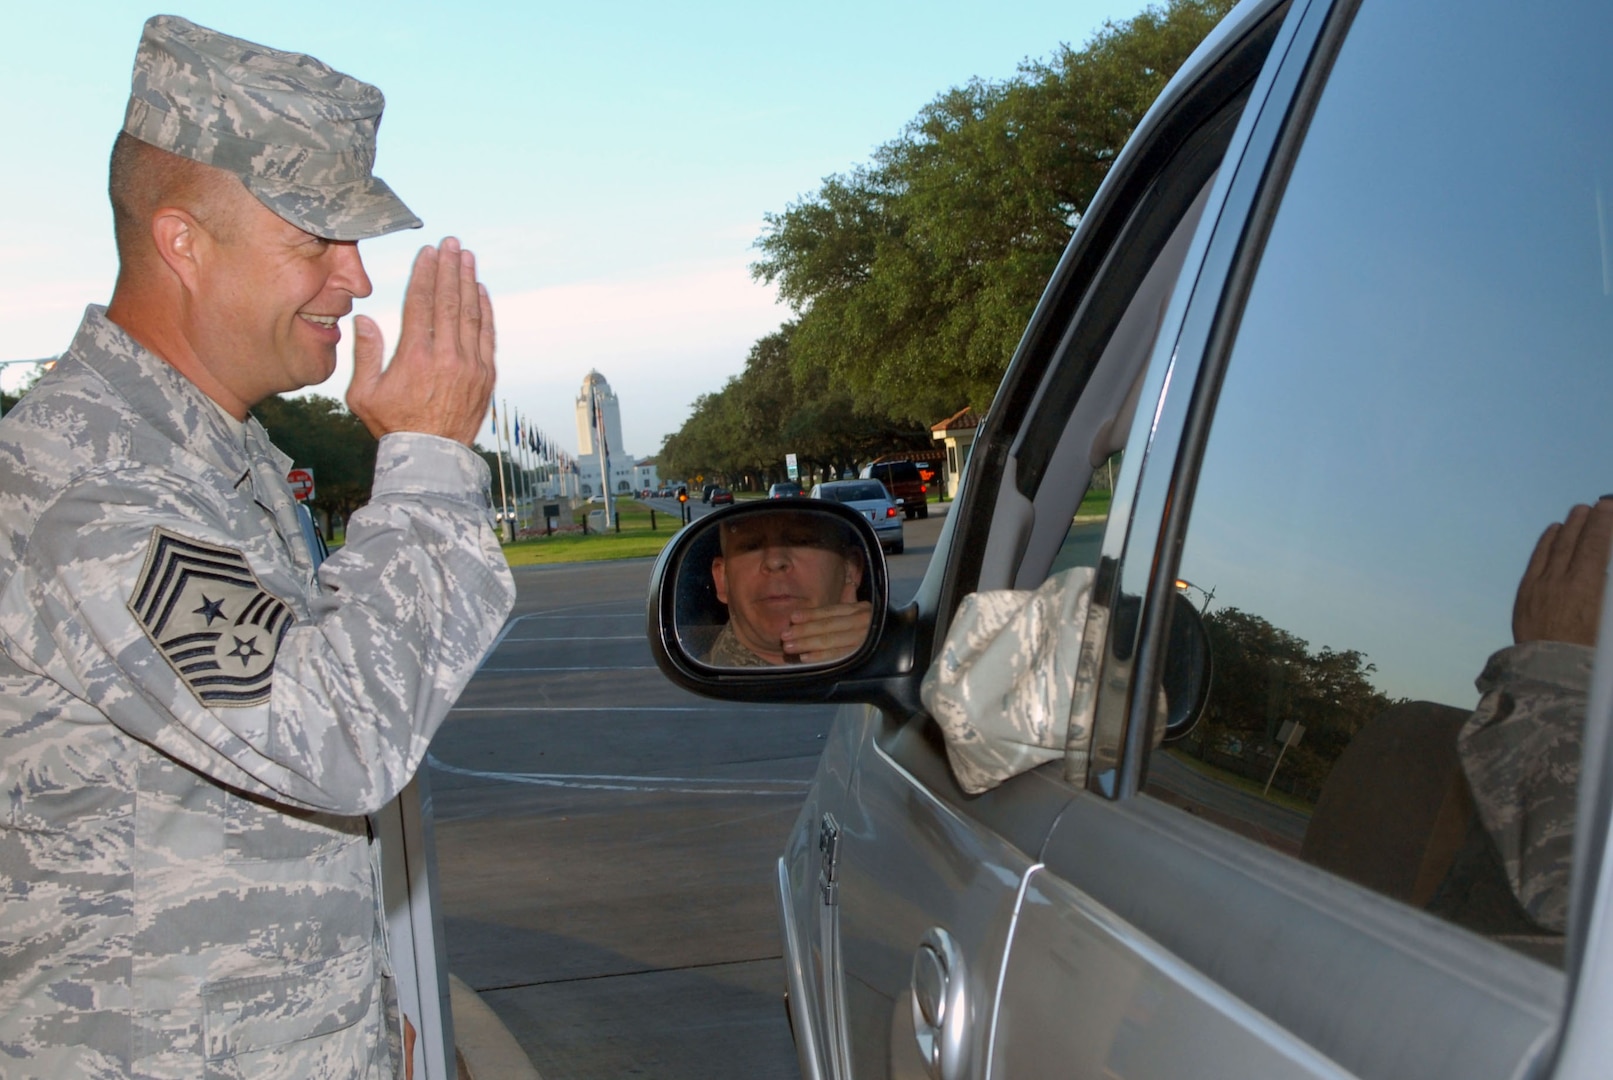 Chief Page salutes an officer while checking identification cards at the front gate recently. The command chief master sergeant was lauded by Air Force Times for living "above and beyond (the) call to service 24/7." (U.S. Air Force photo by Rich McFadden)